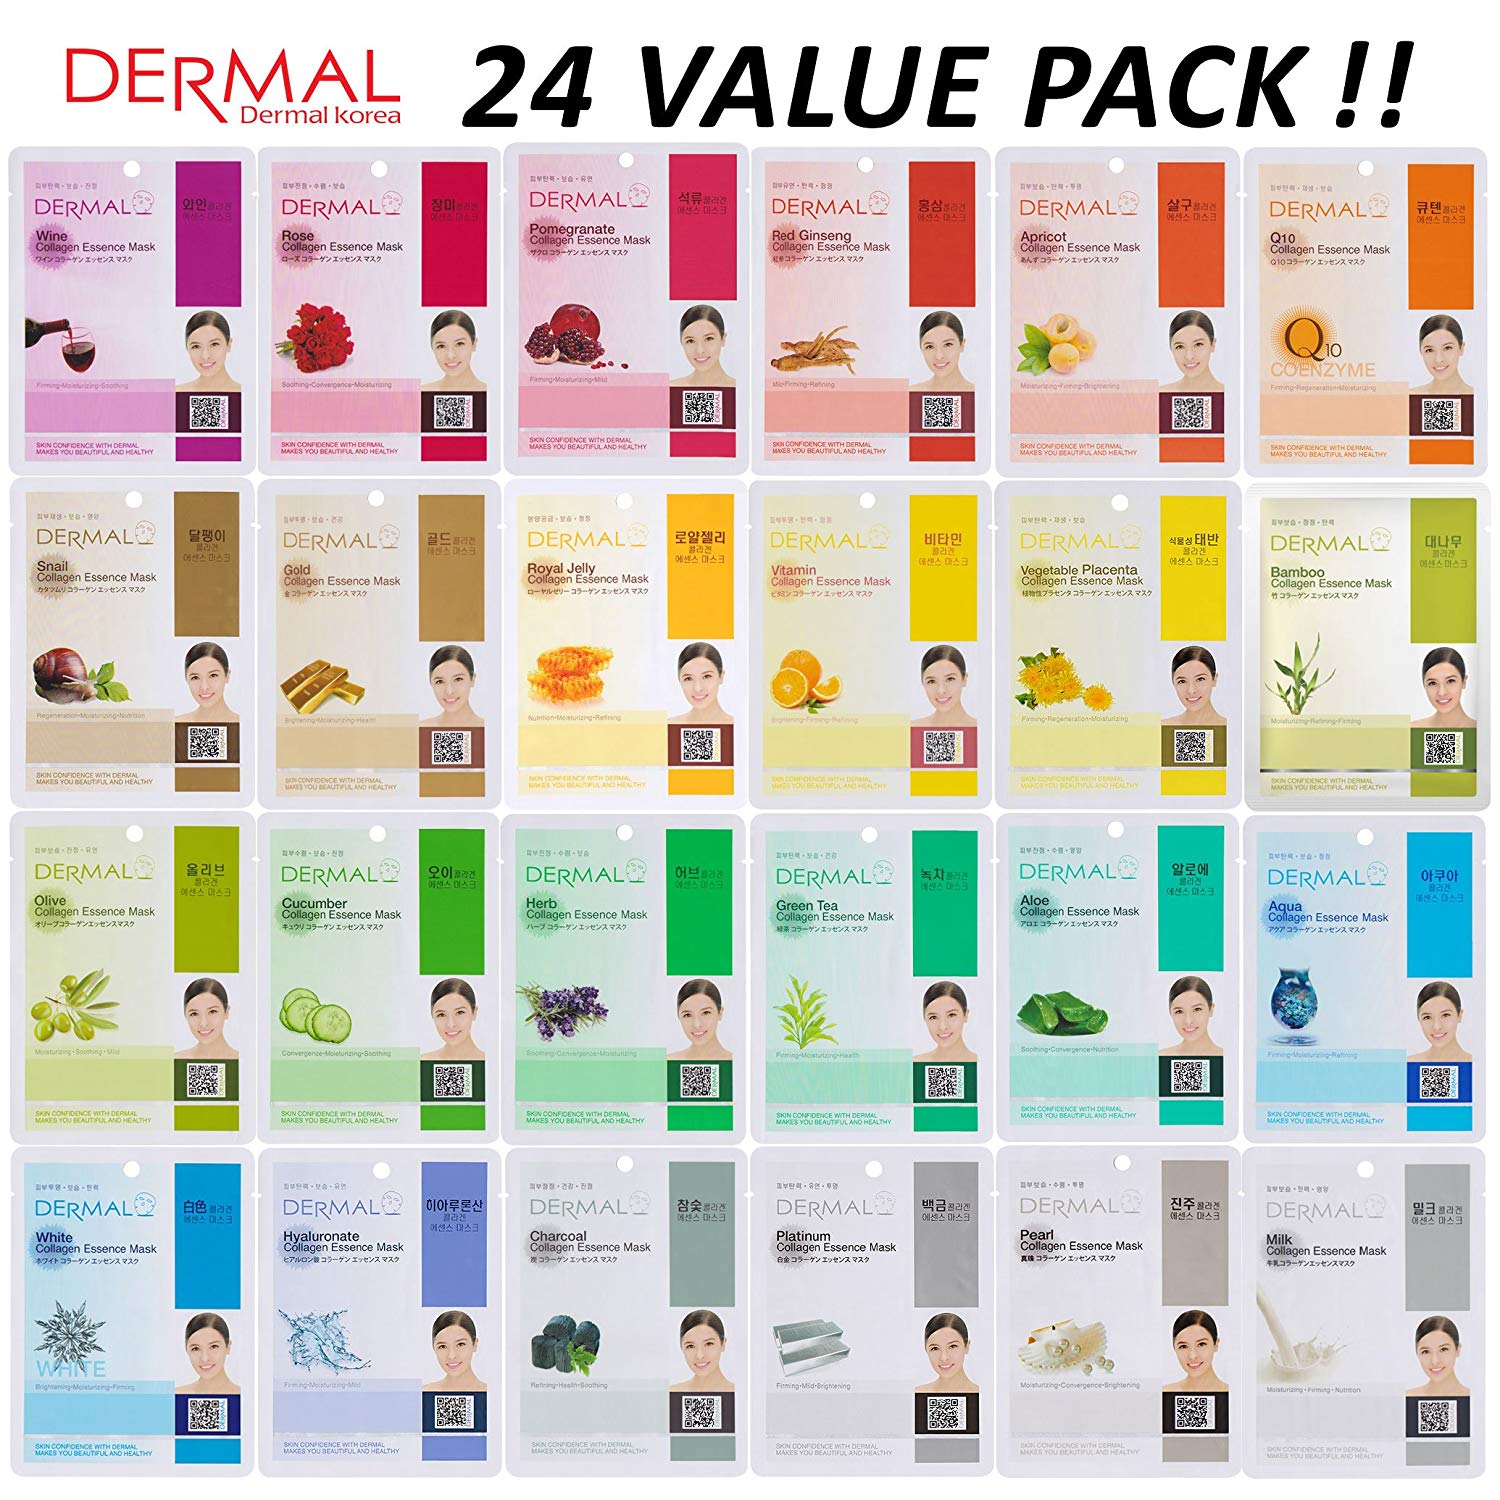 Price:$13.99 DERMAL 24 Combo Pack Collagen Essence Full Face Facial Mask Sheet - The Ultimate Supreme Collection for Every Skin Condition Day to Day Skin Concerns. Nature made Freshly packed Korean Face Mask